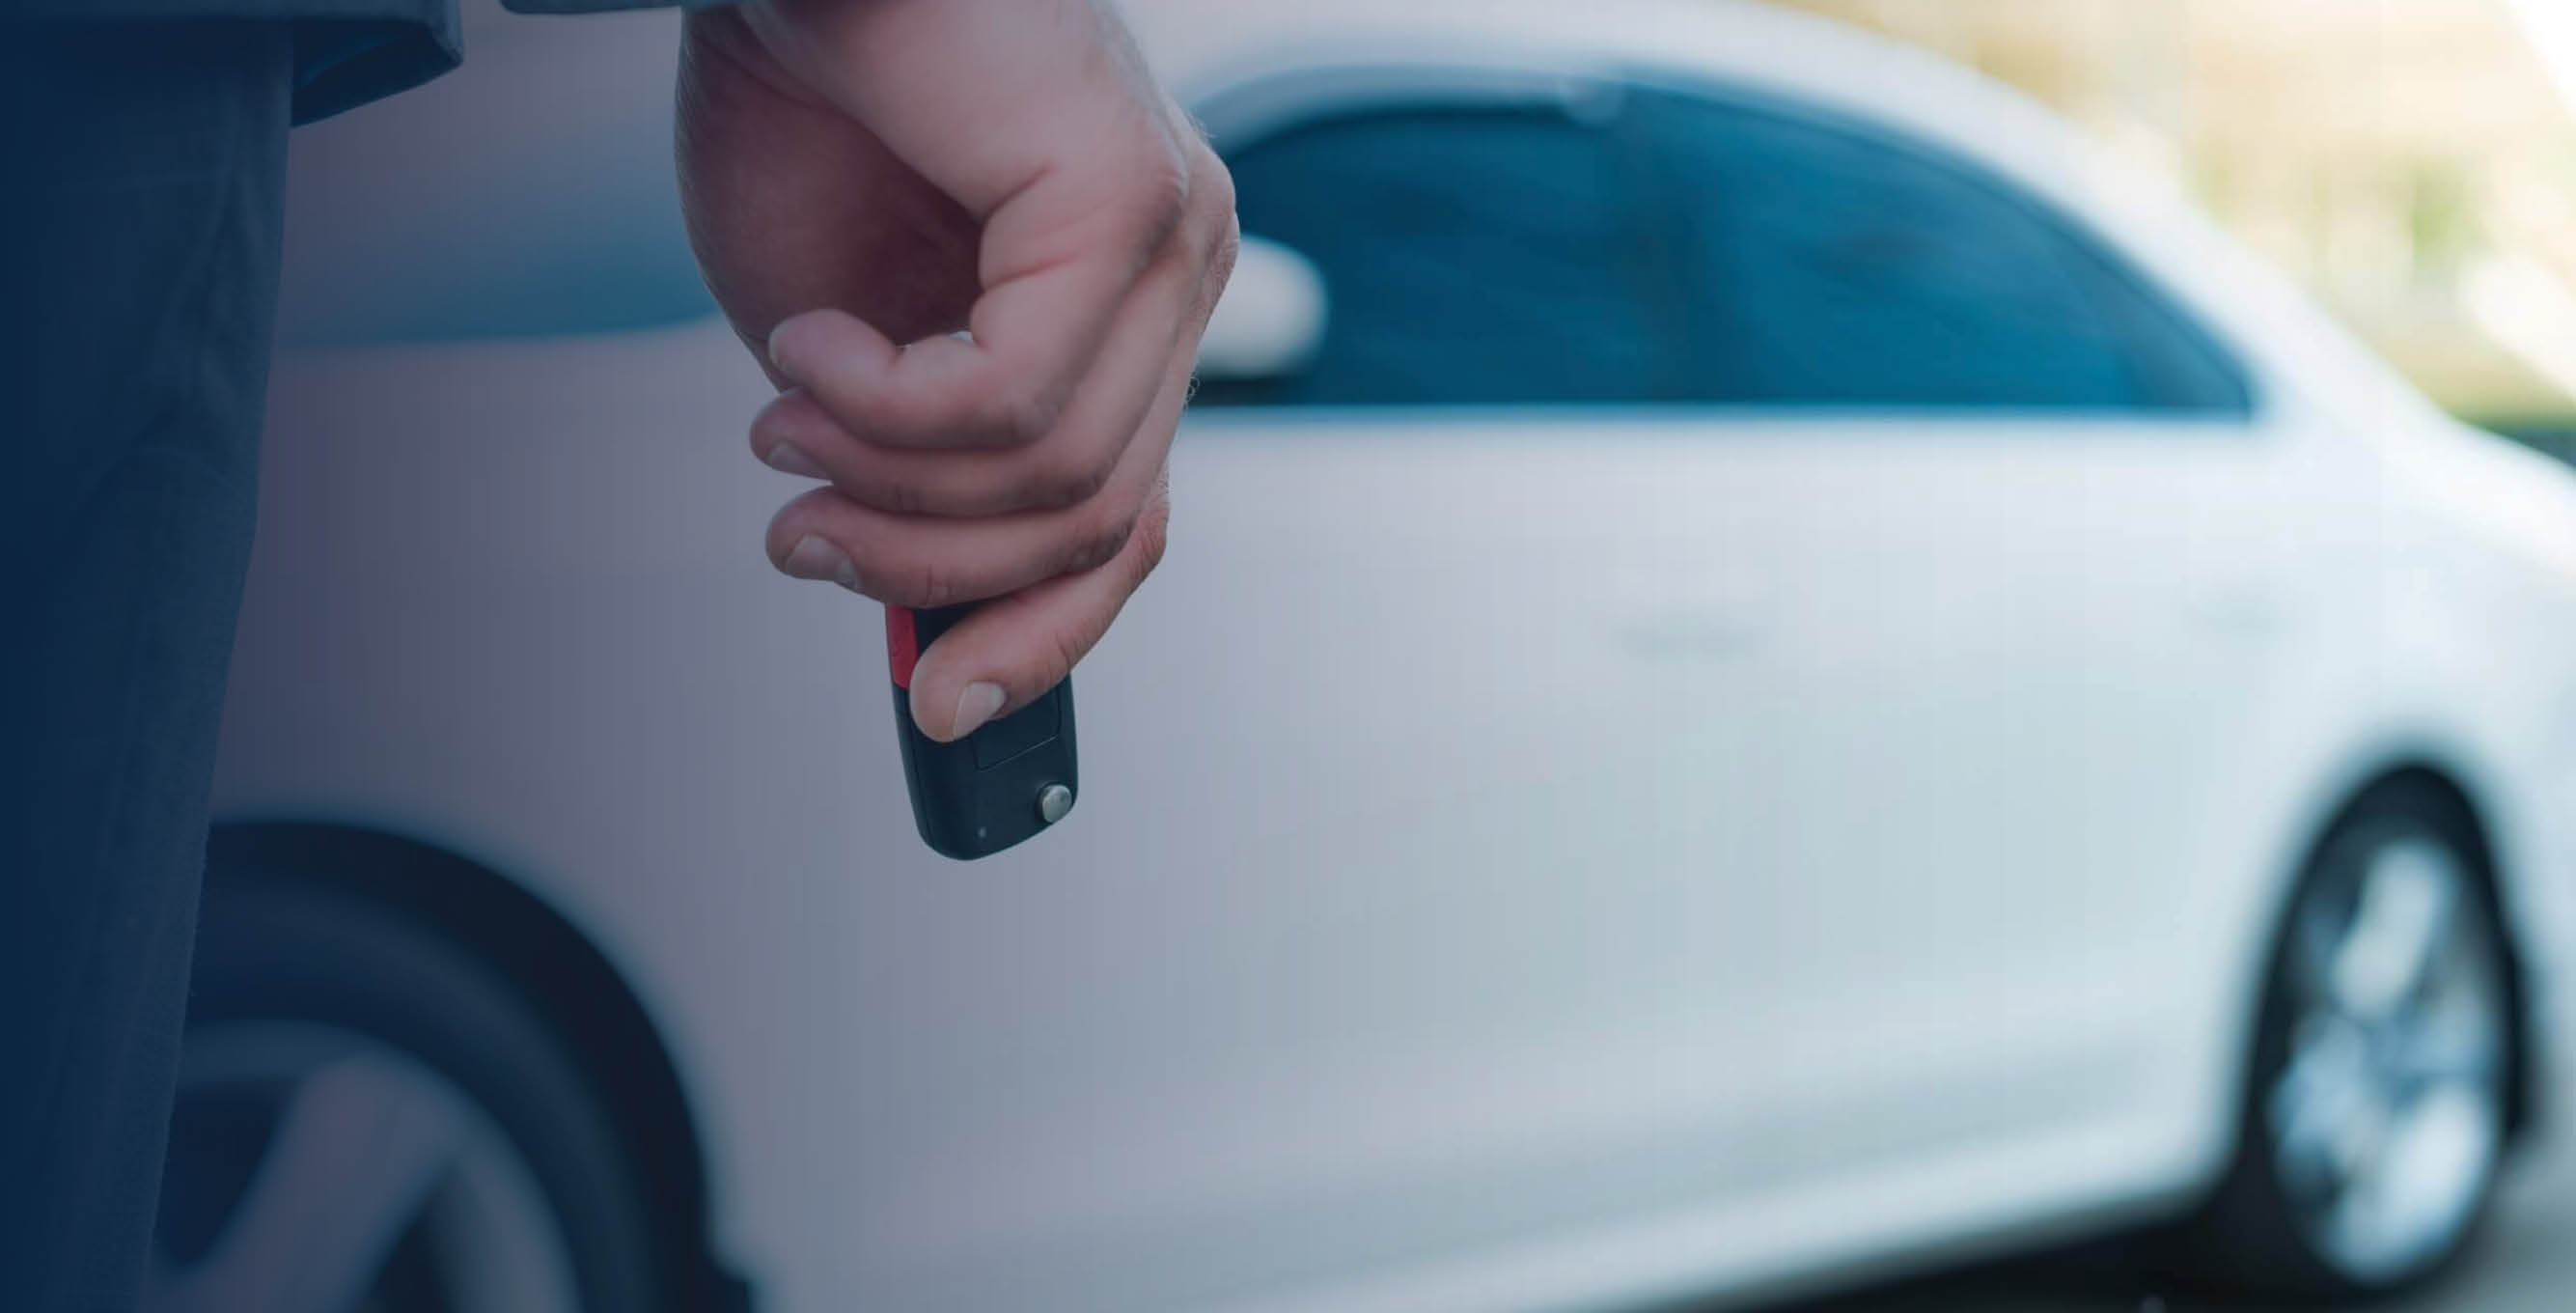 Hand holding car key in front of white car.